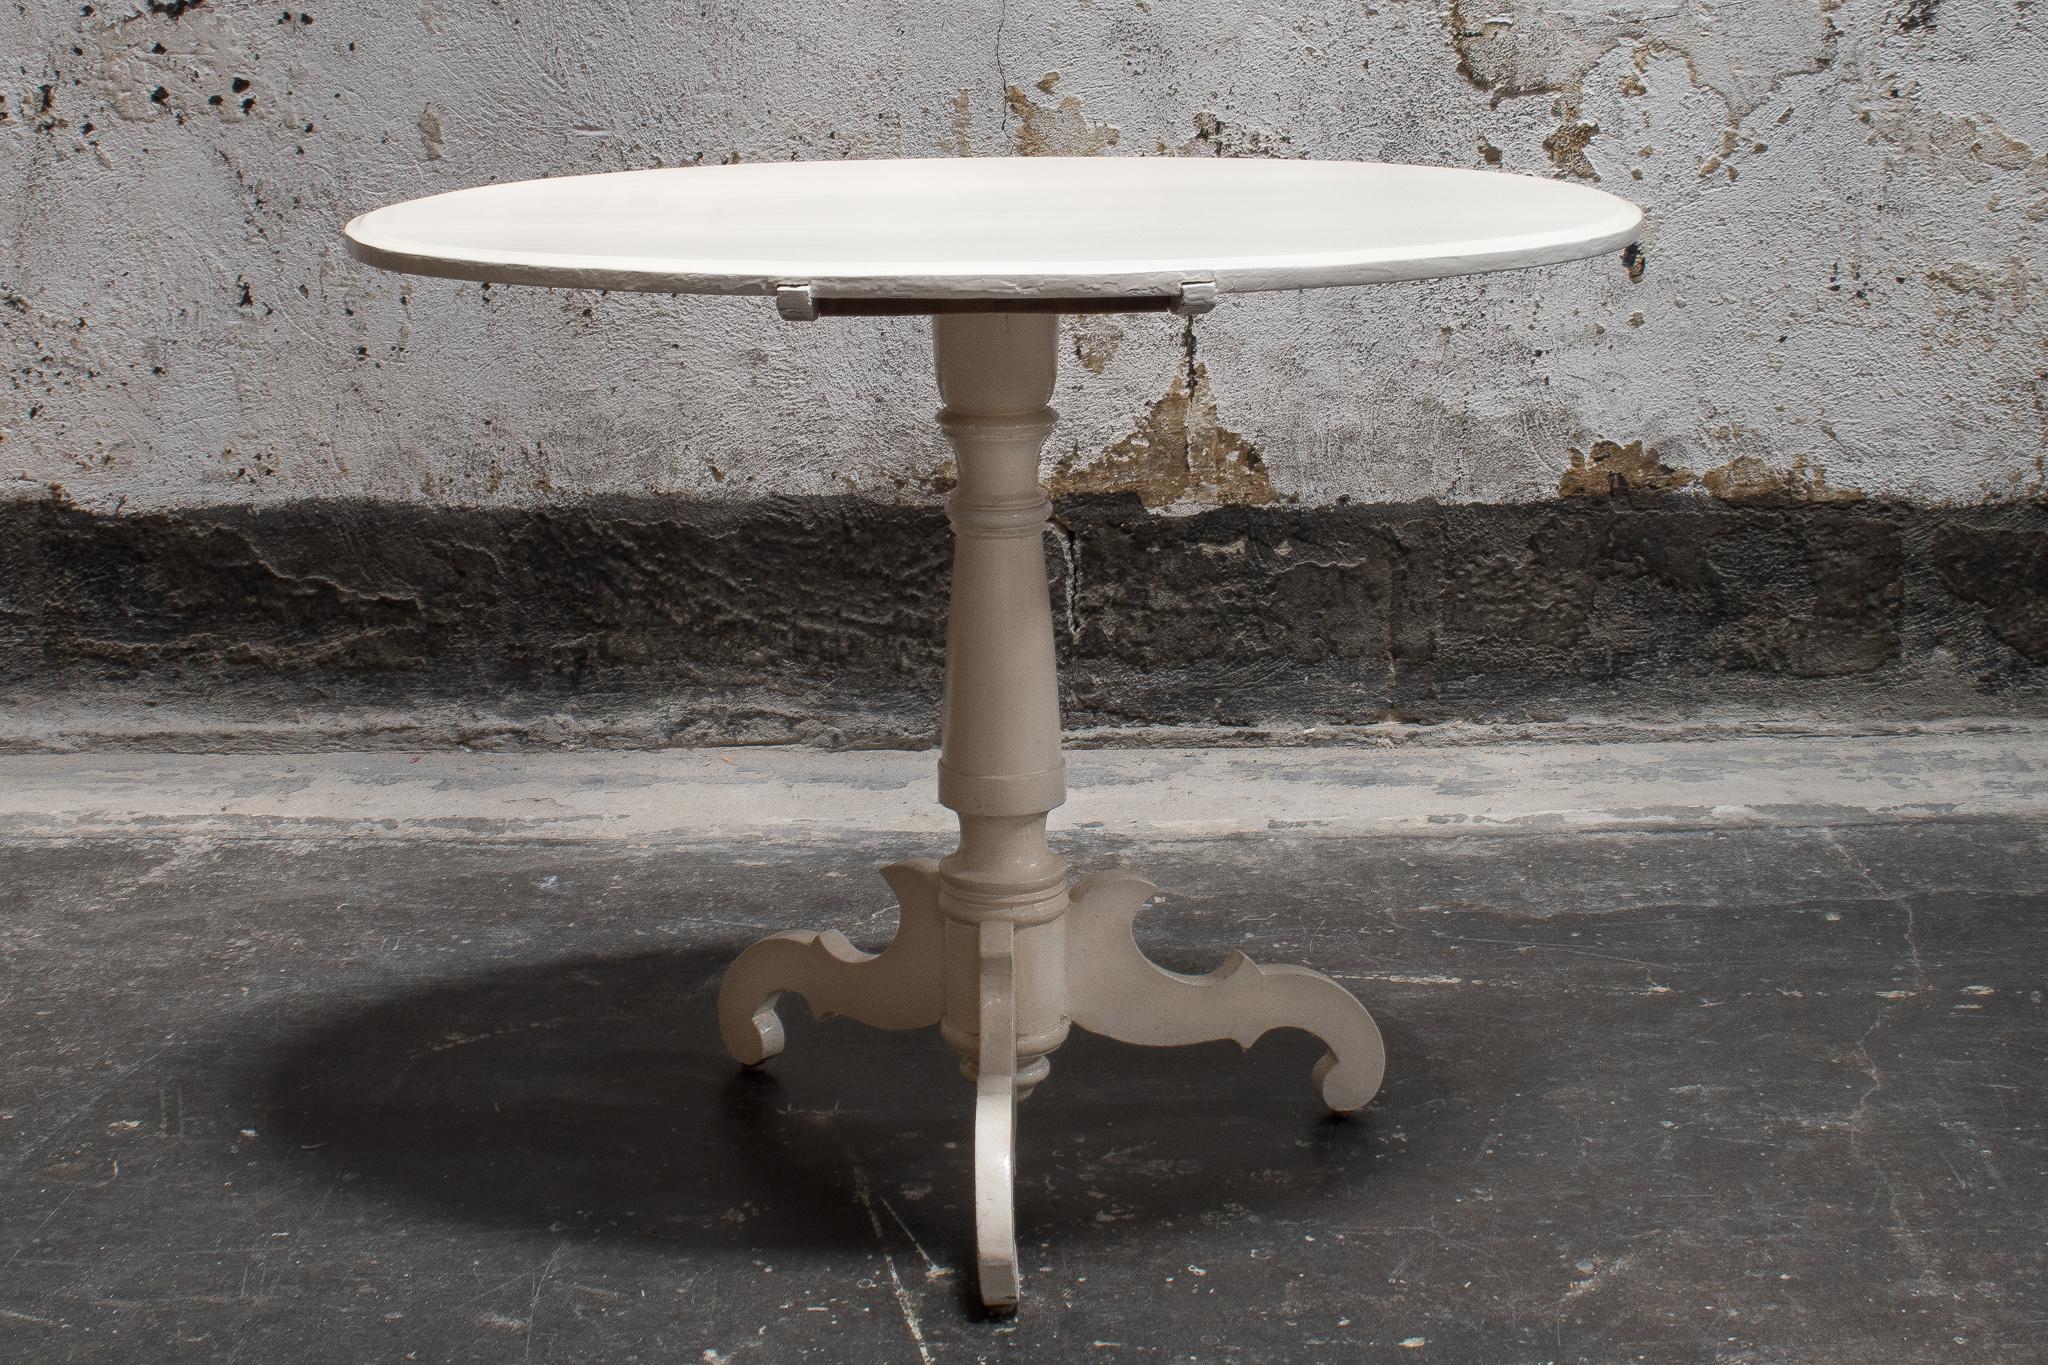 Oval tea or game table was made in the early 1900s. This handsome table features a simple circular surface with a hand-turned center post on a three-leg pedestal base. Painted in soft off-white, table has patina that points to its early 20th century